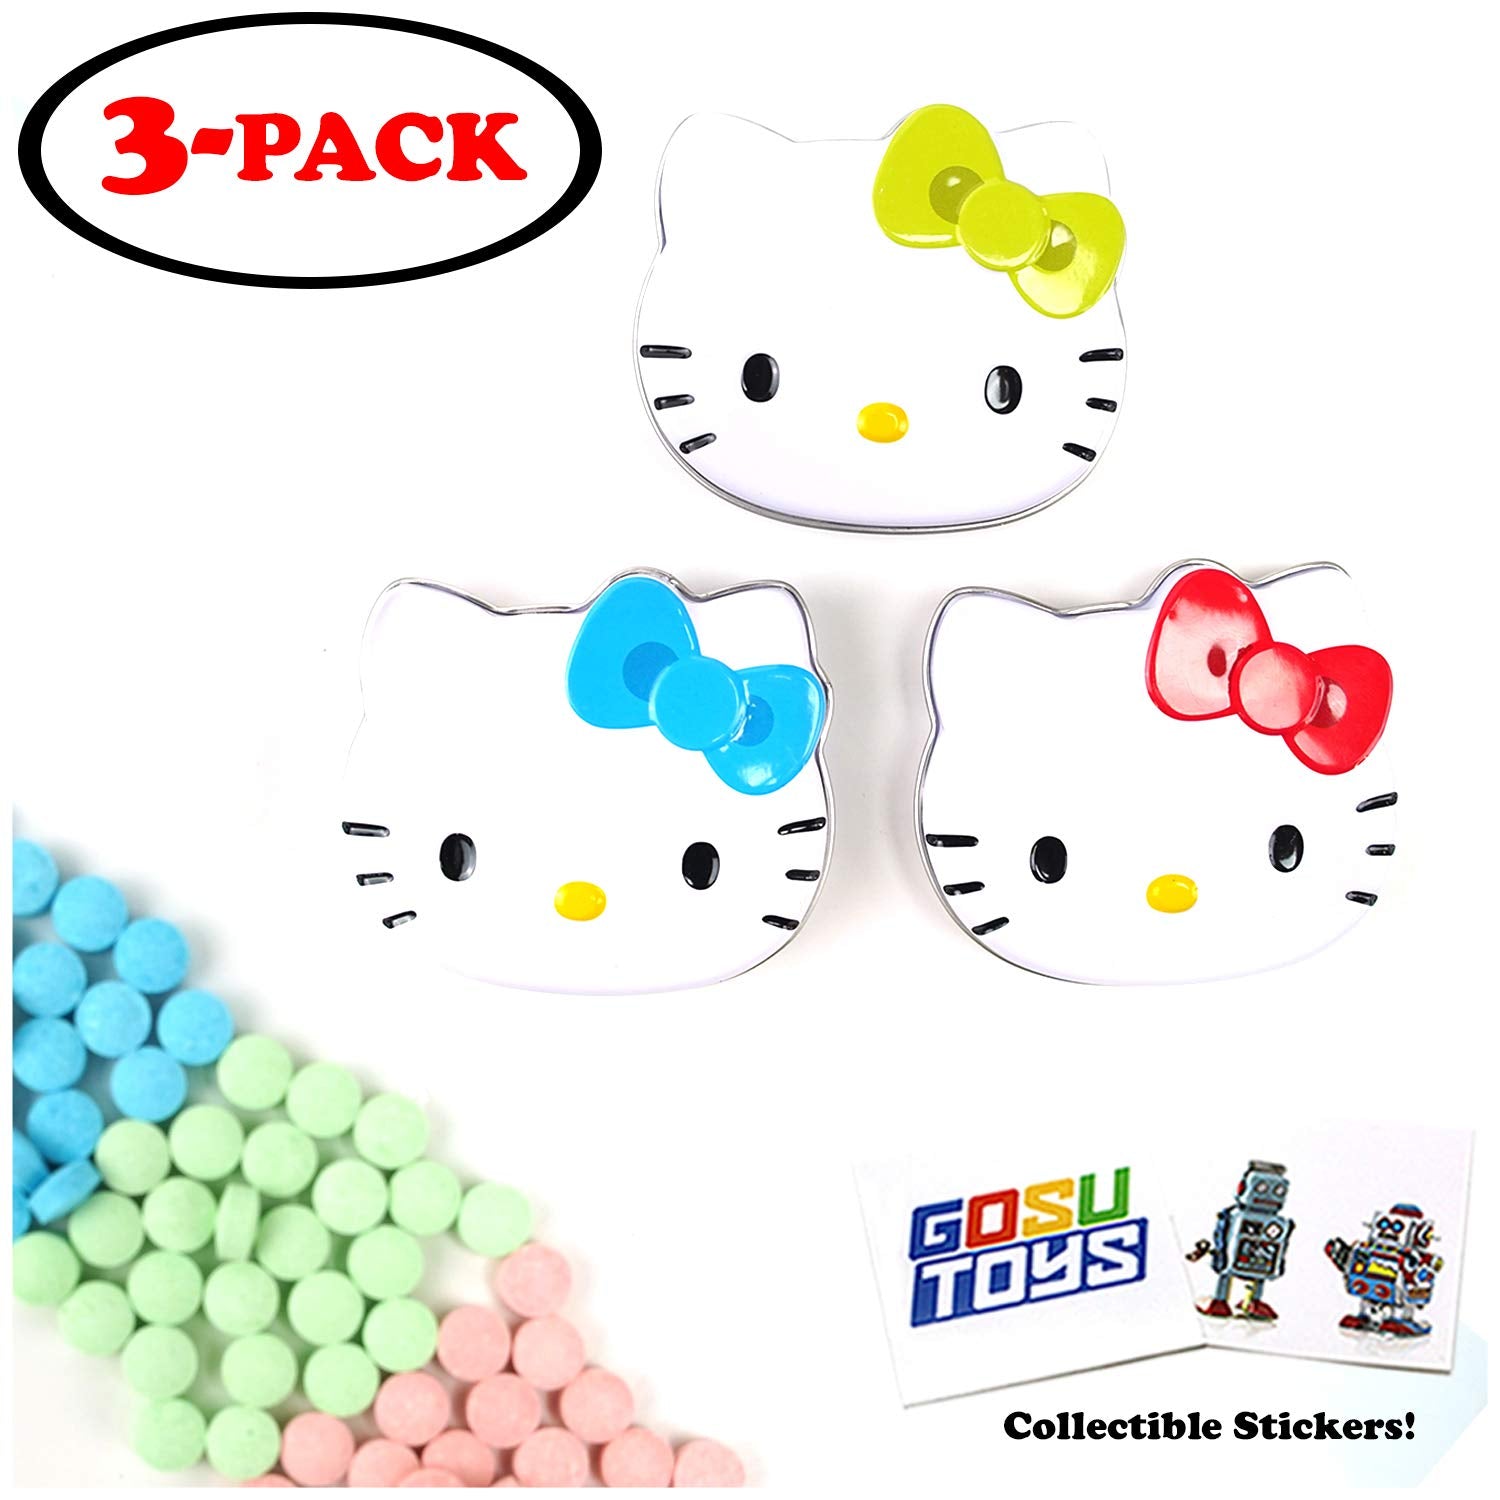 Hello Kitty Sour Candy (3 Pack) 3 Flavors - Green Apple, Raspberry, and Cherry with 2 GosuToys Stickers